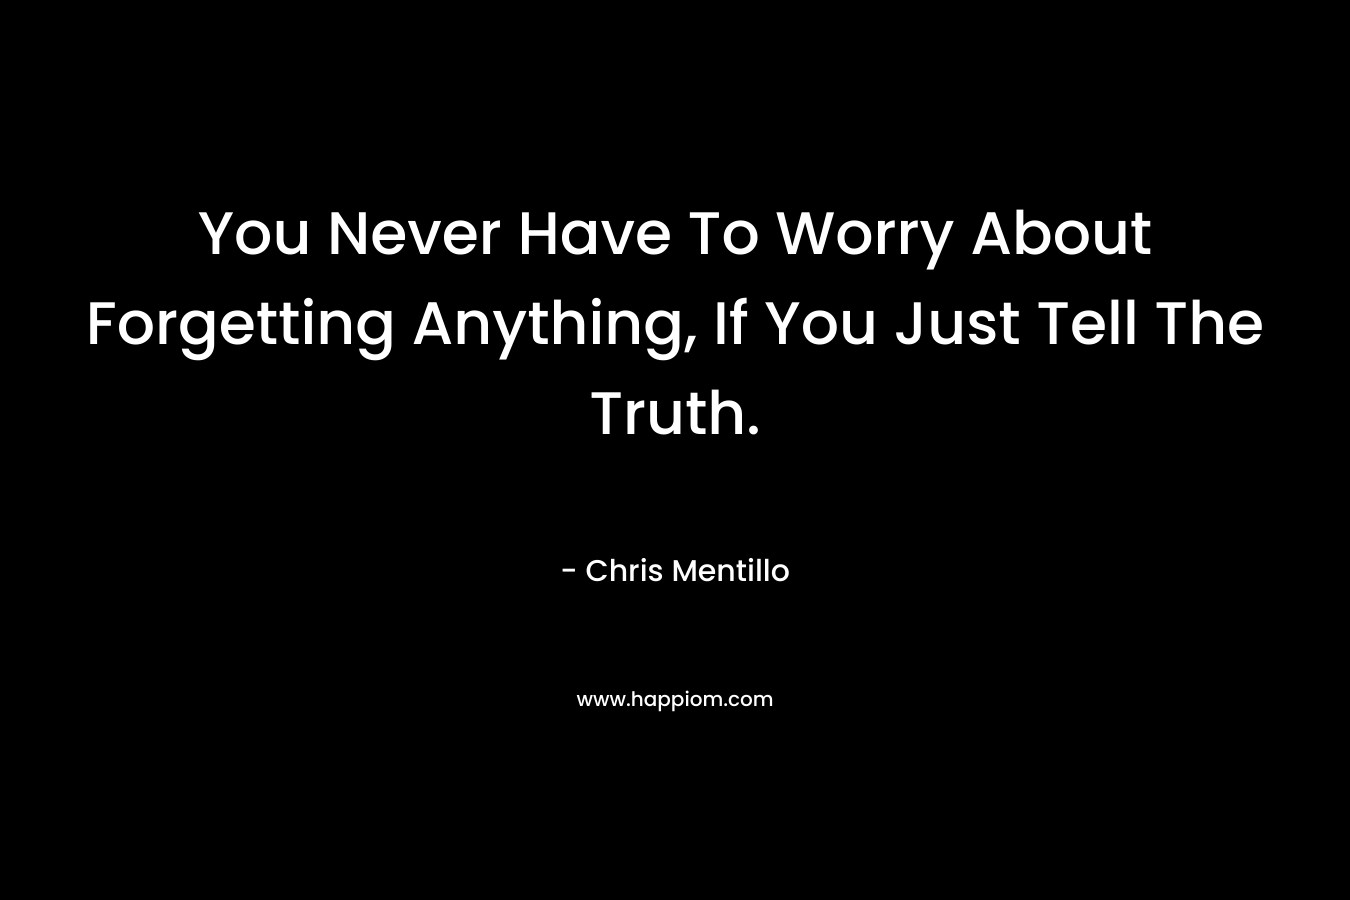 You Never Have To Worry About Forgetting Anything, If You Just Tell The Truth. – Chris Mentillo